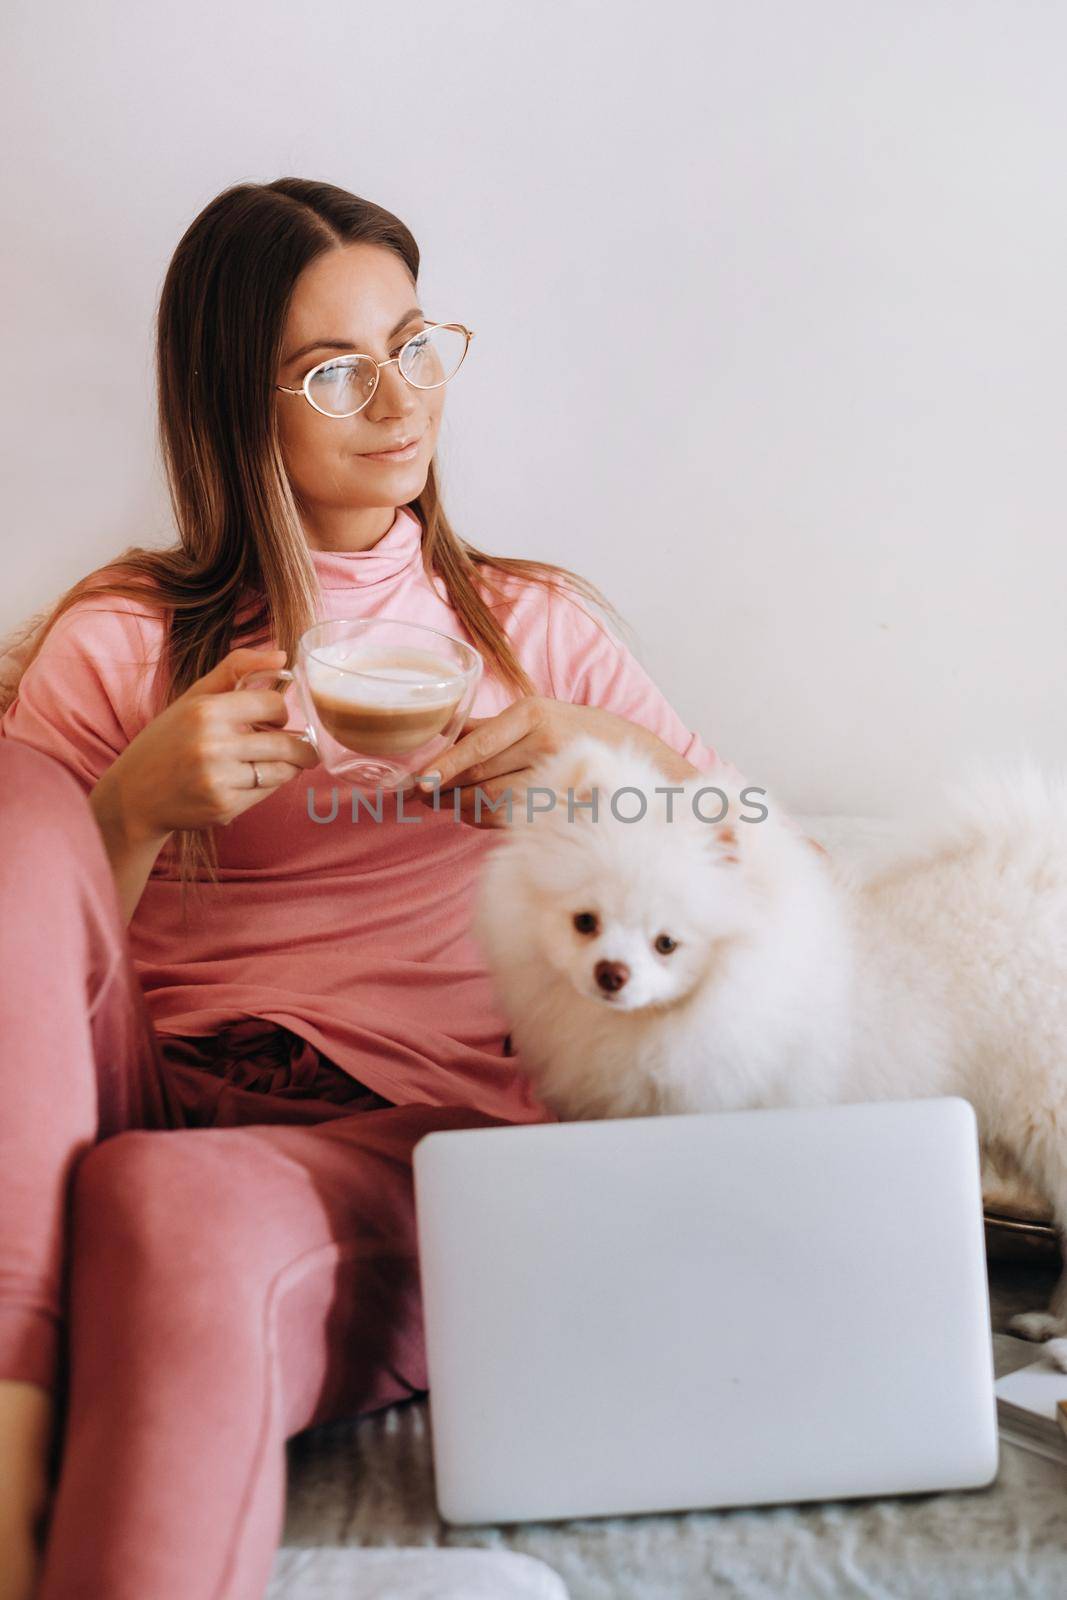 a girl in pajamas at home is working on a laptop with her dog Spitzer, the dog and its owner are resting on the couch and watching the laptop.Household chores by Lobachad